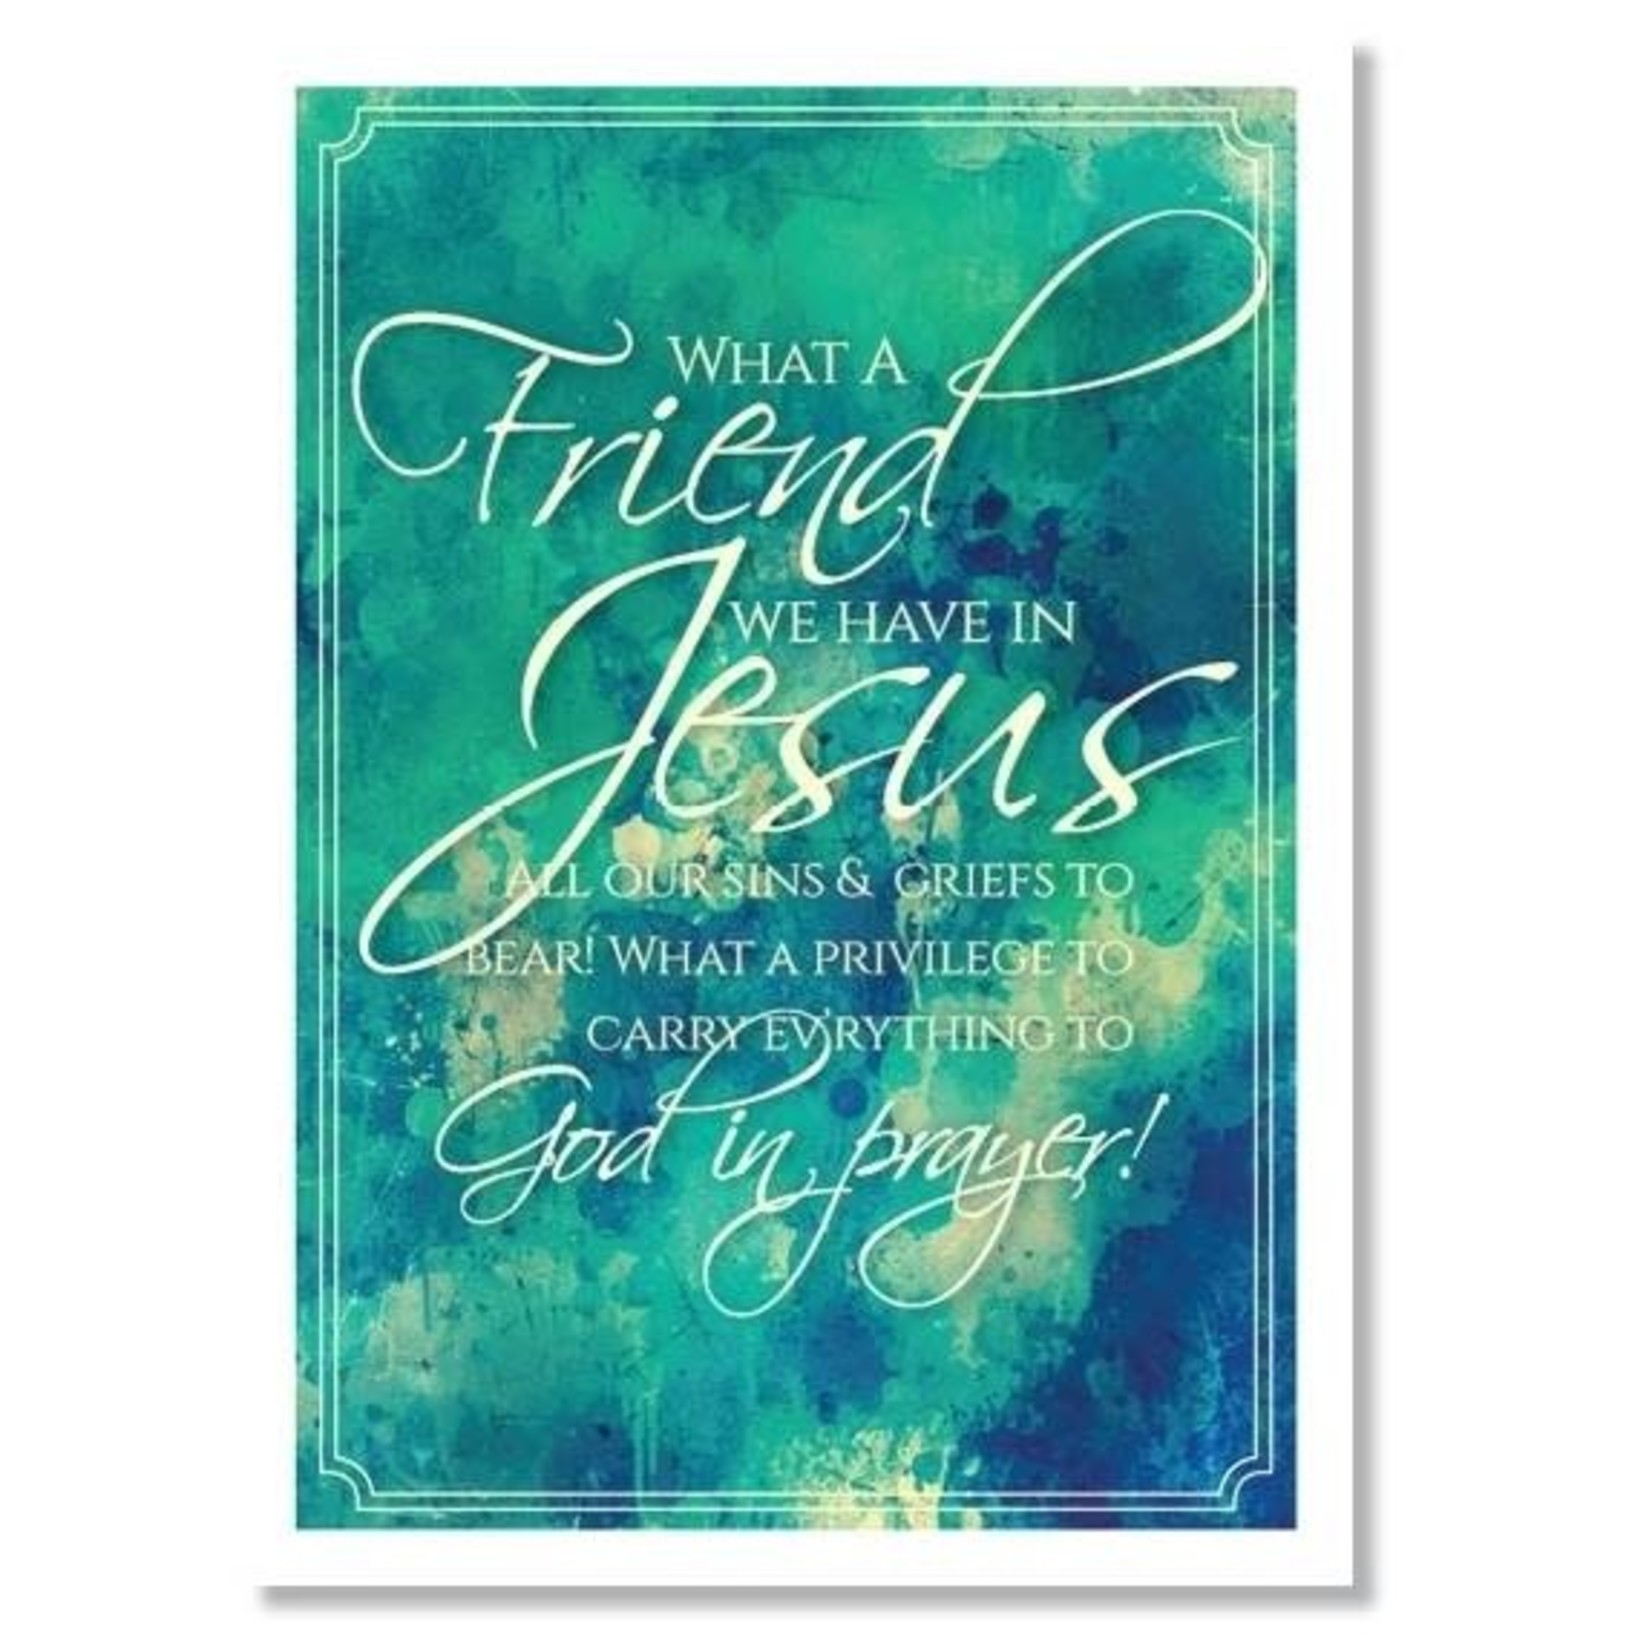 Hymns In My Heart - 5x7" Greeting Card - Hospice - What a Friend We Have in Jesus